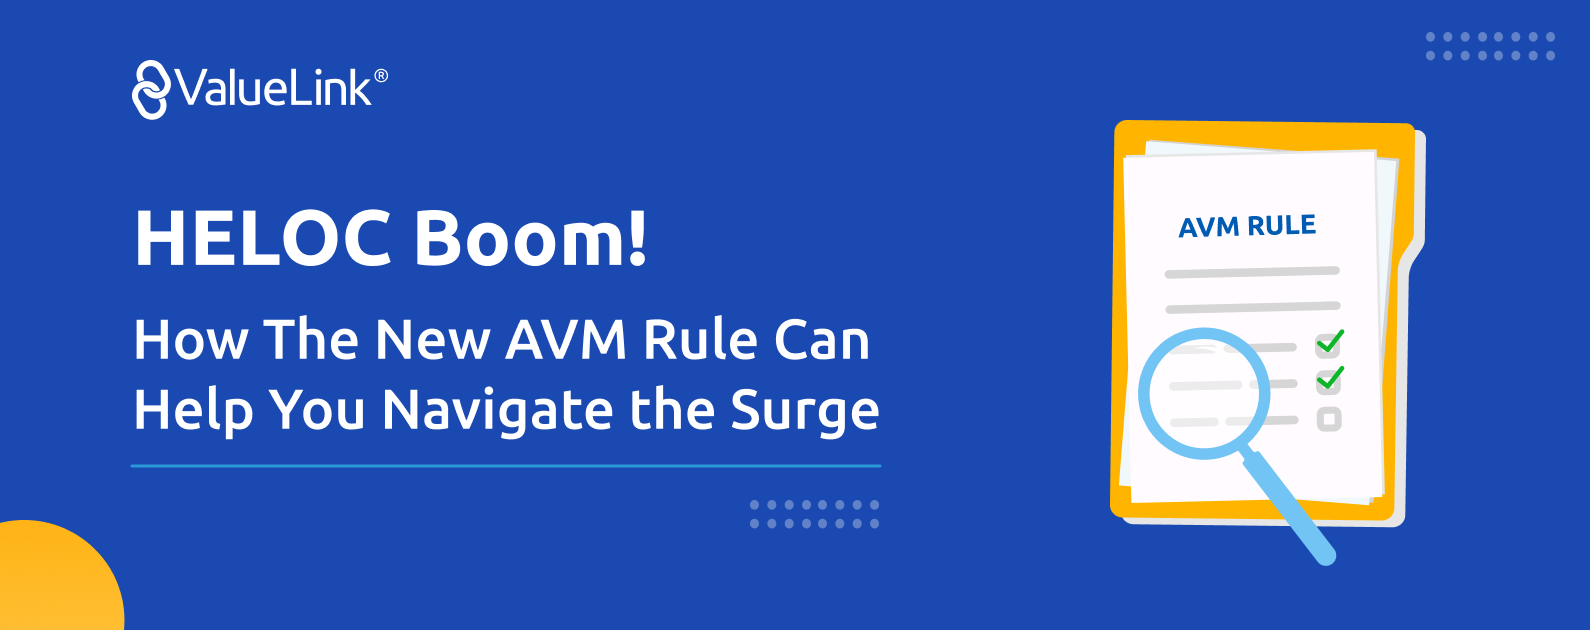 How The New AVM Rule Can Help You Navigate the Surge - Inner banner